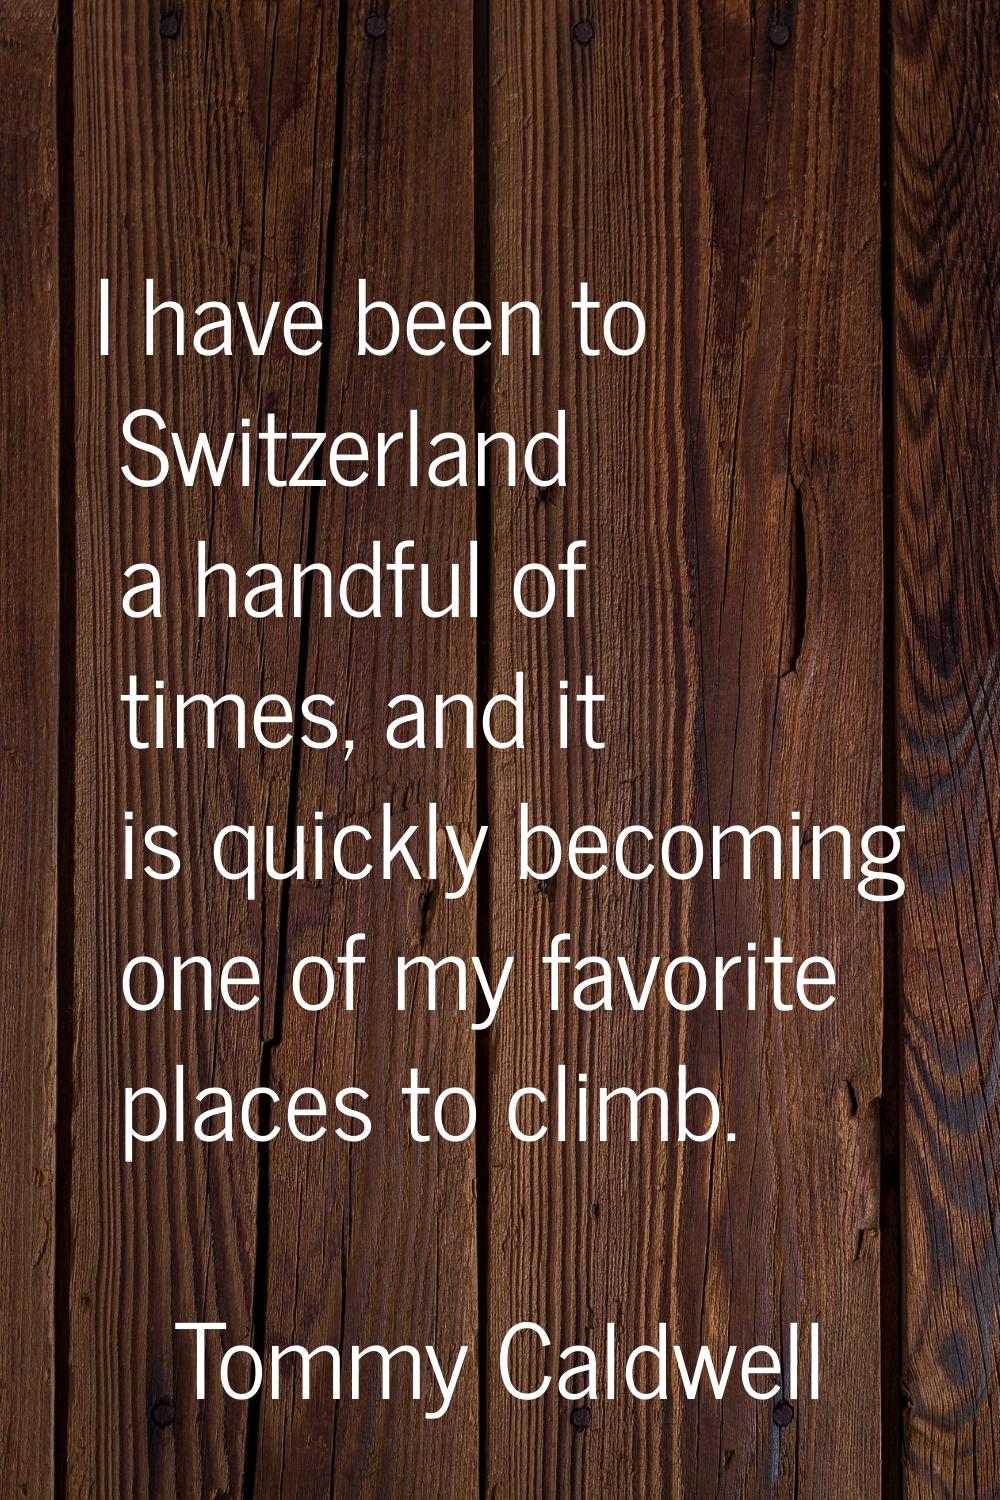 I have been to Switzerland a handful of times, and it is quickly becoming one of my favorite places